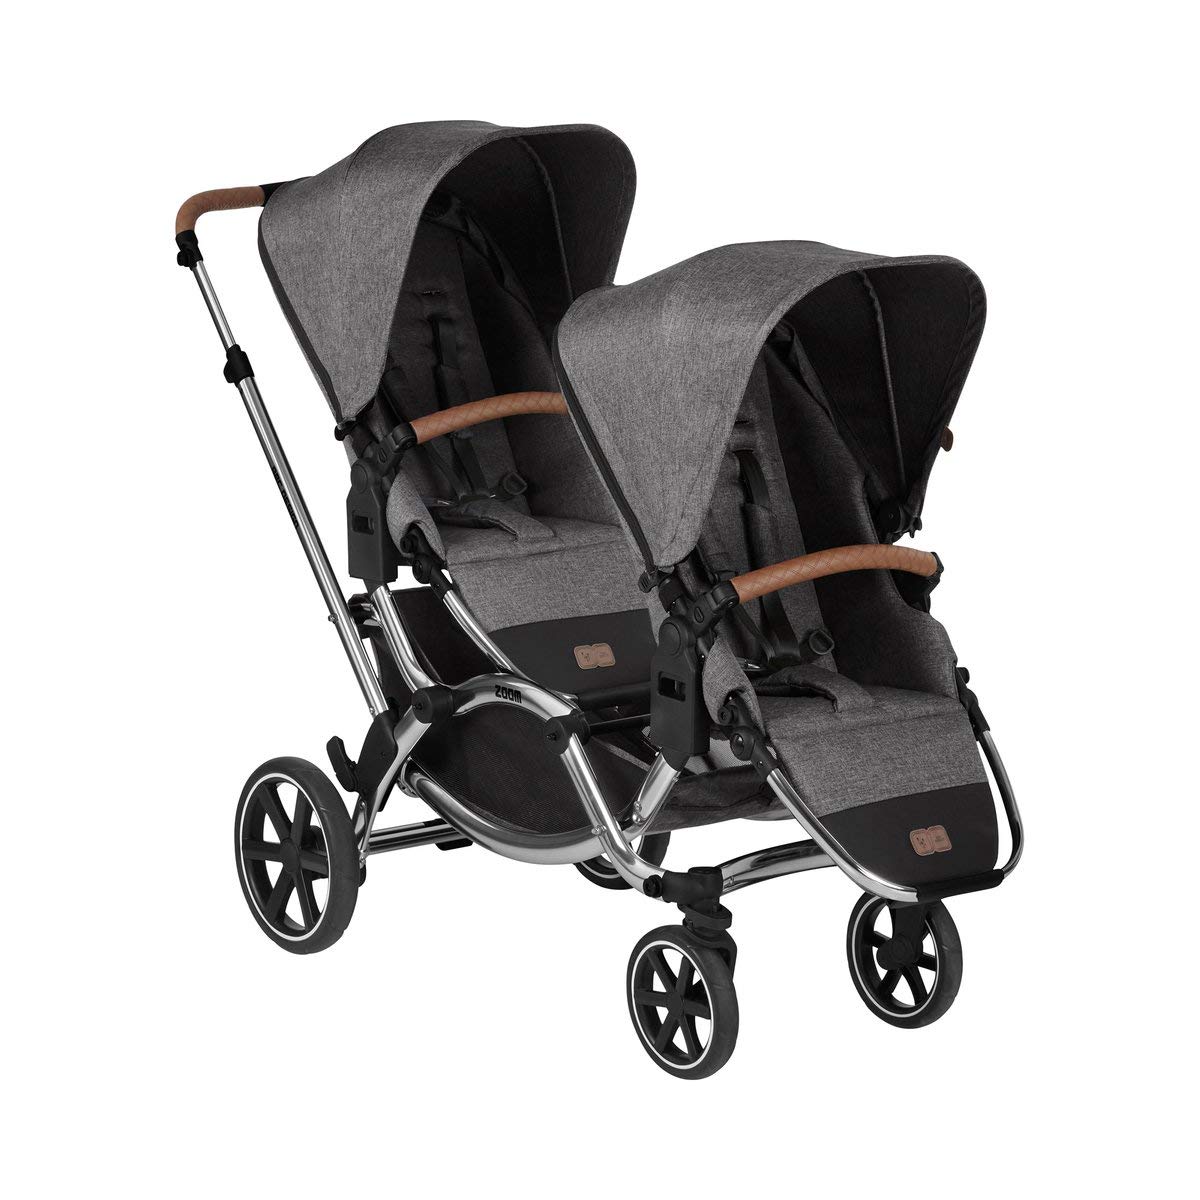 ABC Design Zoom Diamond Edition Sibling Pushchair - Twin and Sibling Pushchair for Newborns & Babies - 2 Children - Includes 2 x Buggy Sports Seat - Wheel Suspension & Air Chamber Wheels - Colour: Asphalt